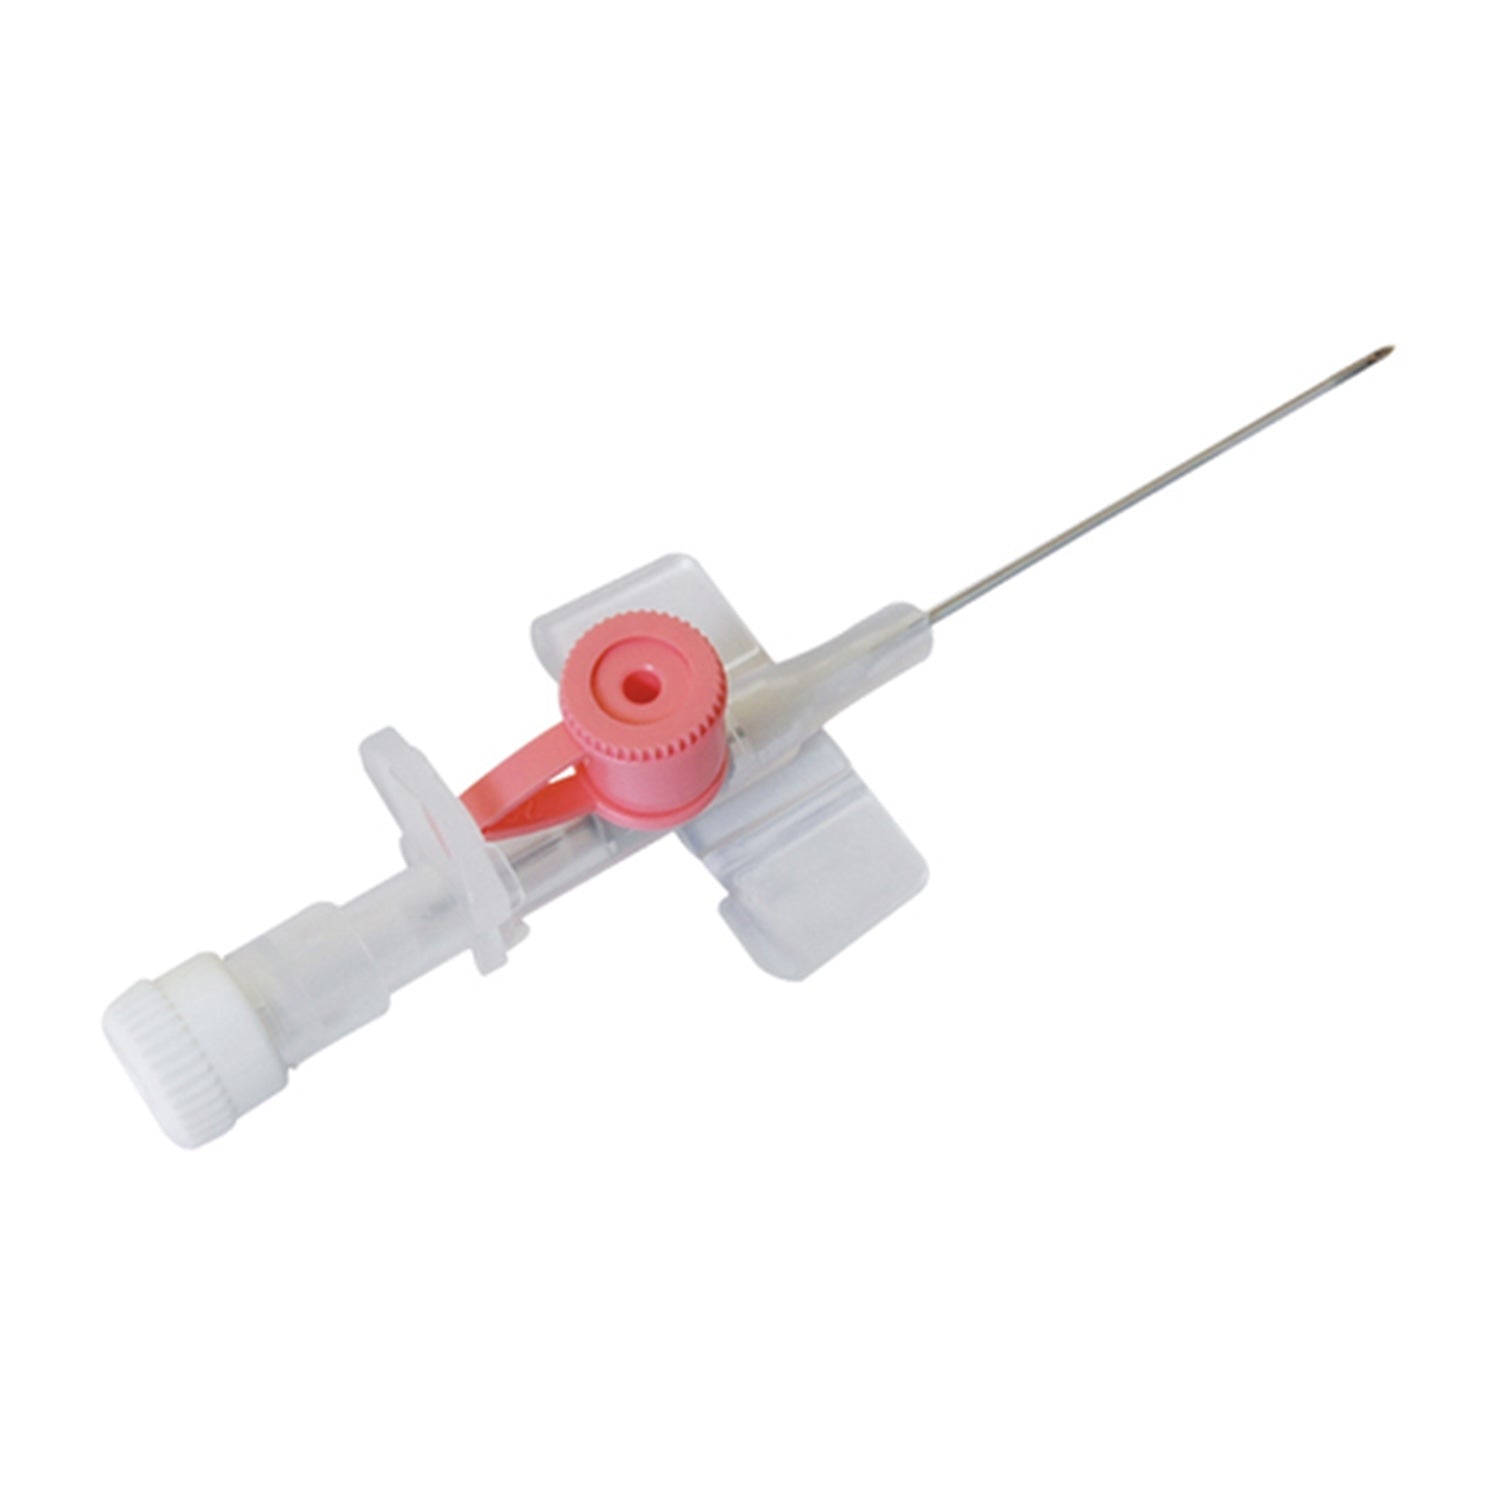 BD Venflon Pro Peripheral IV Cannula with Injection Port | Pink x 20G x 32 x 1mm | Single (1)